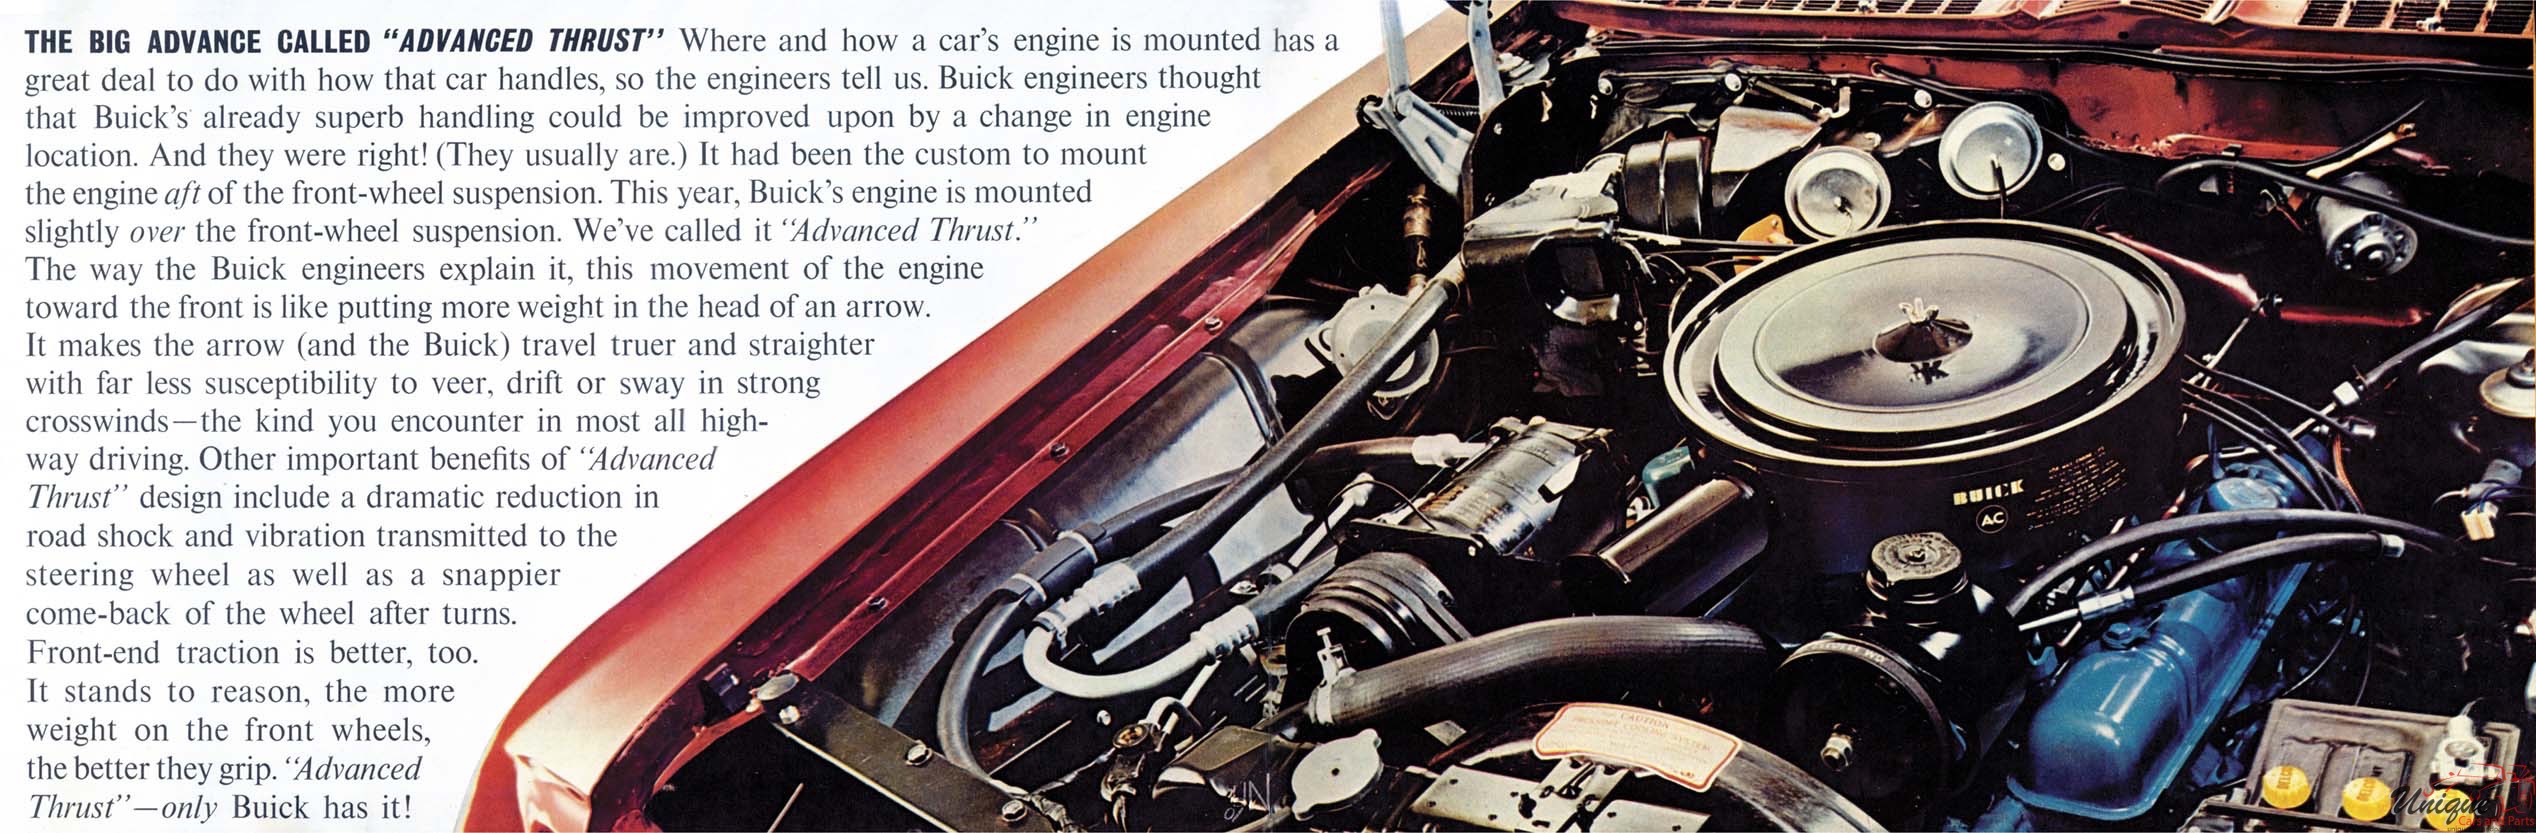 1962 Buick Full-Line All Models Brochure Page 12